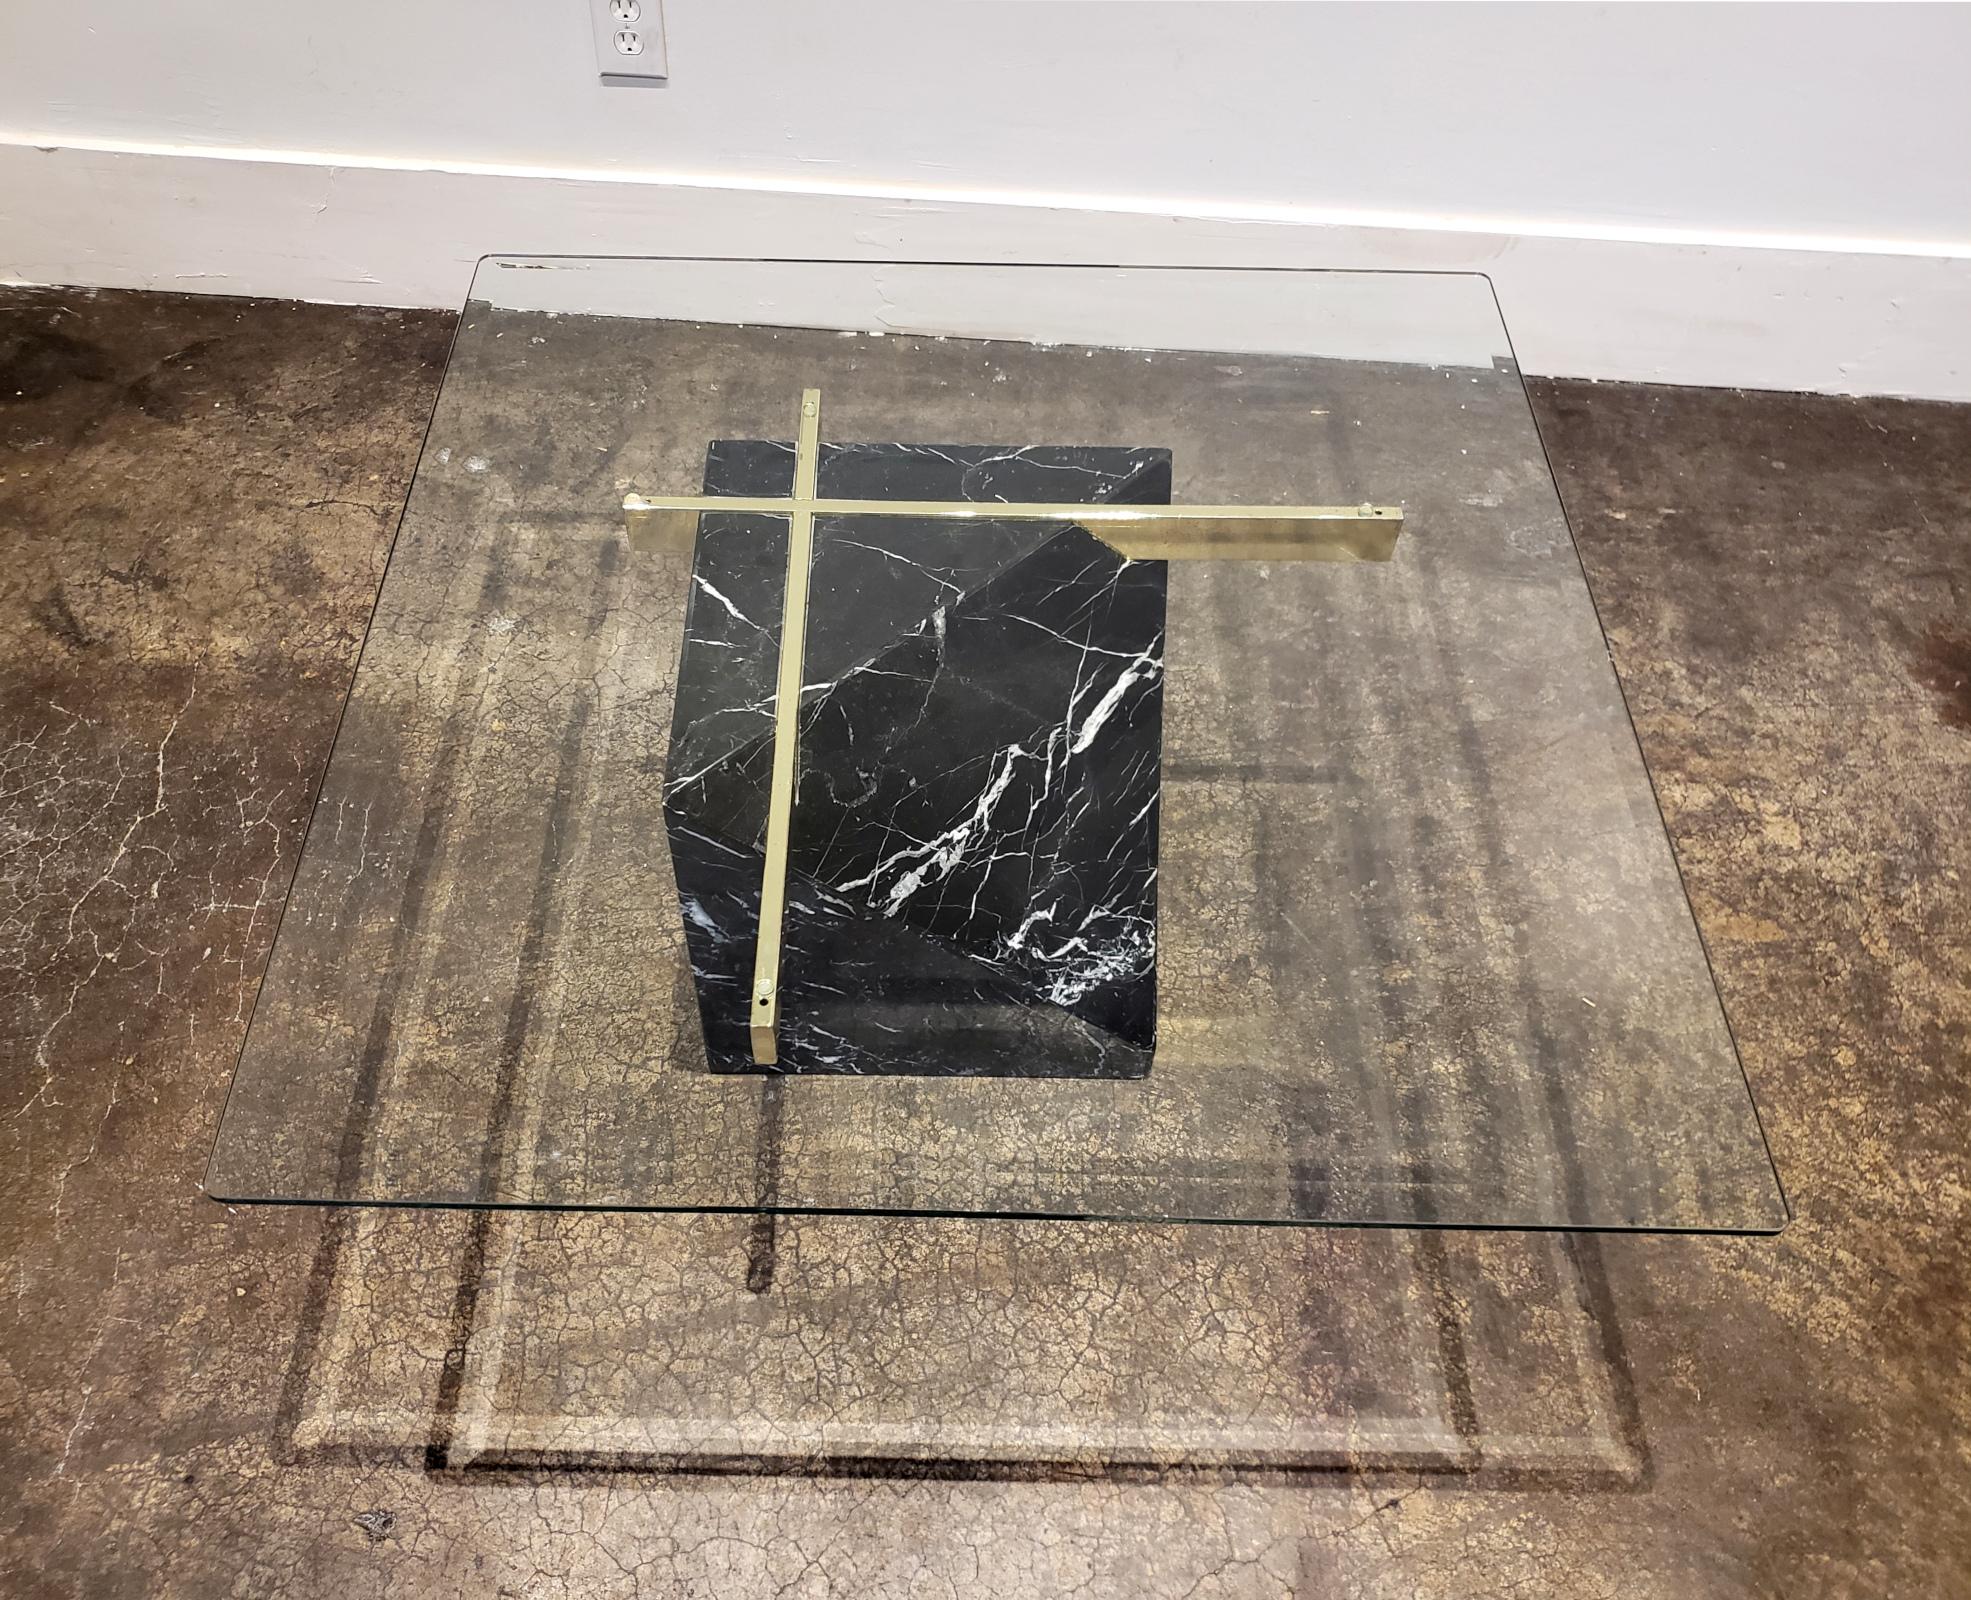 Artedi black marble coffee table, circa 1980s. Trapezoidal base of richly white-veined black marble with brass support elements. Square, beveled glass top.